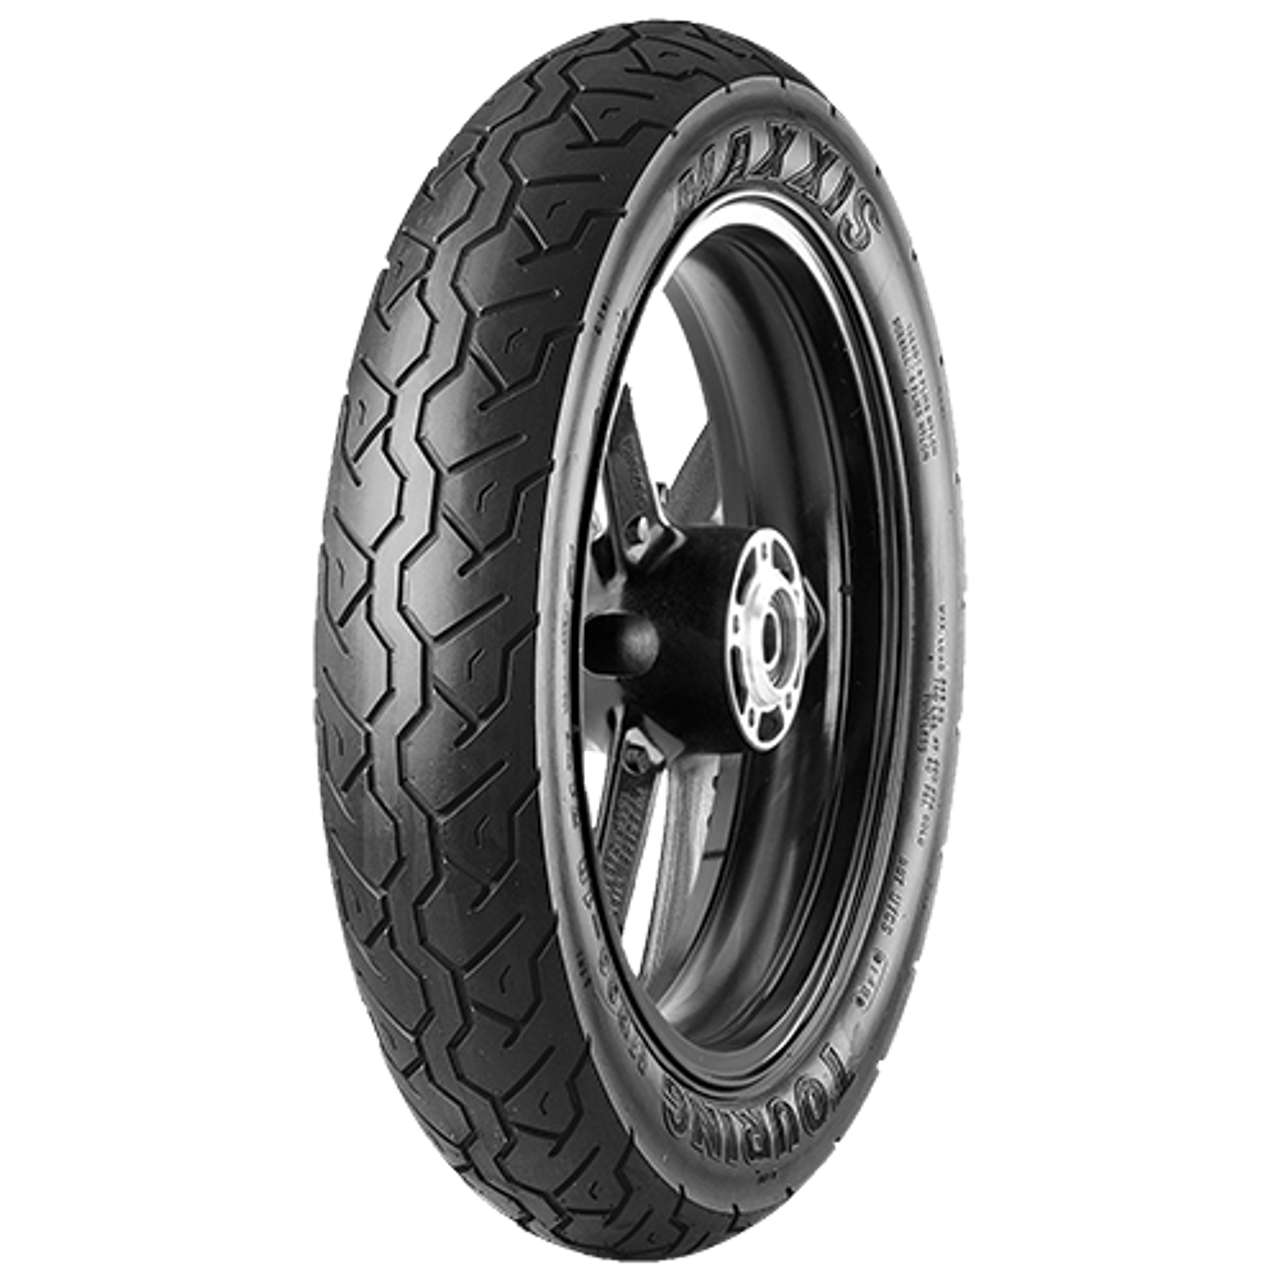 MAXXIS M6011 CLASSIC FRONT 120/90 - 18 TL 65H FRONT